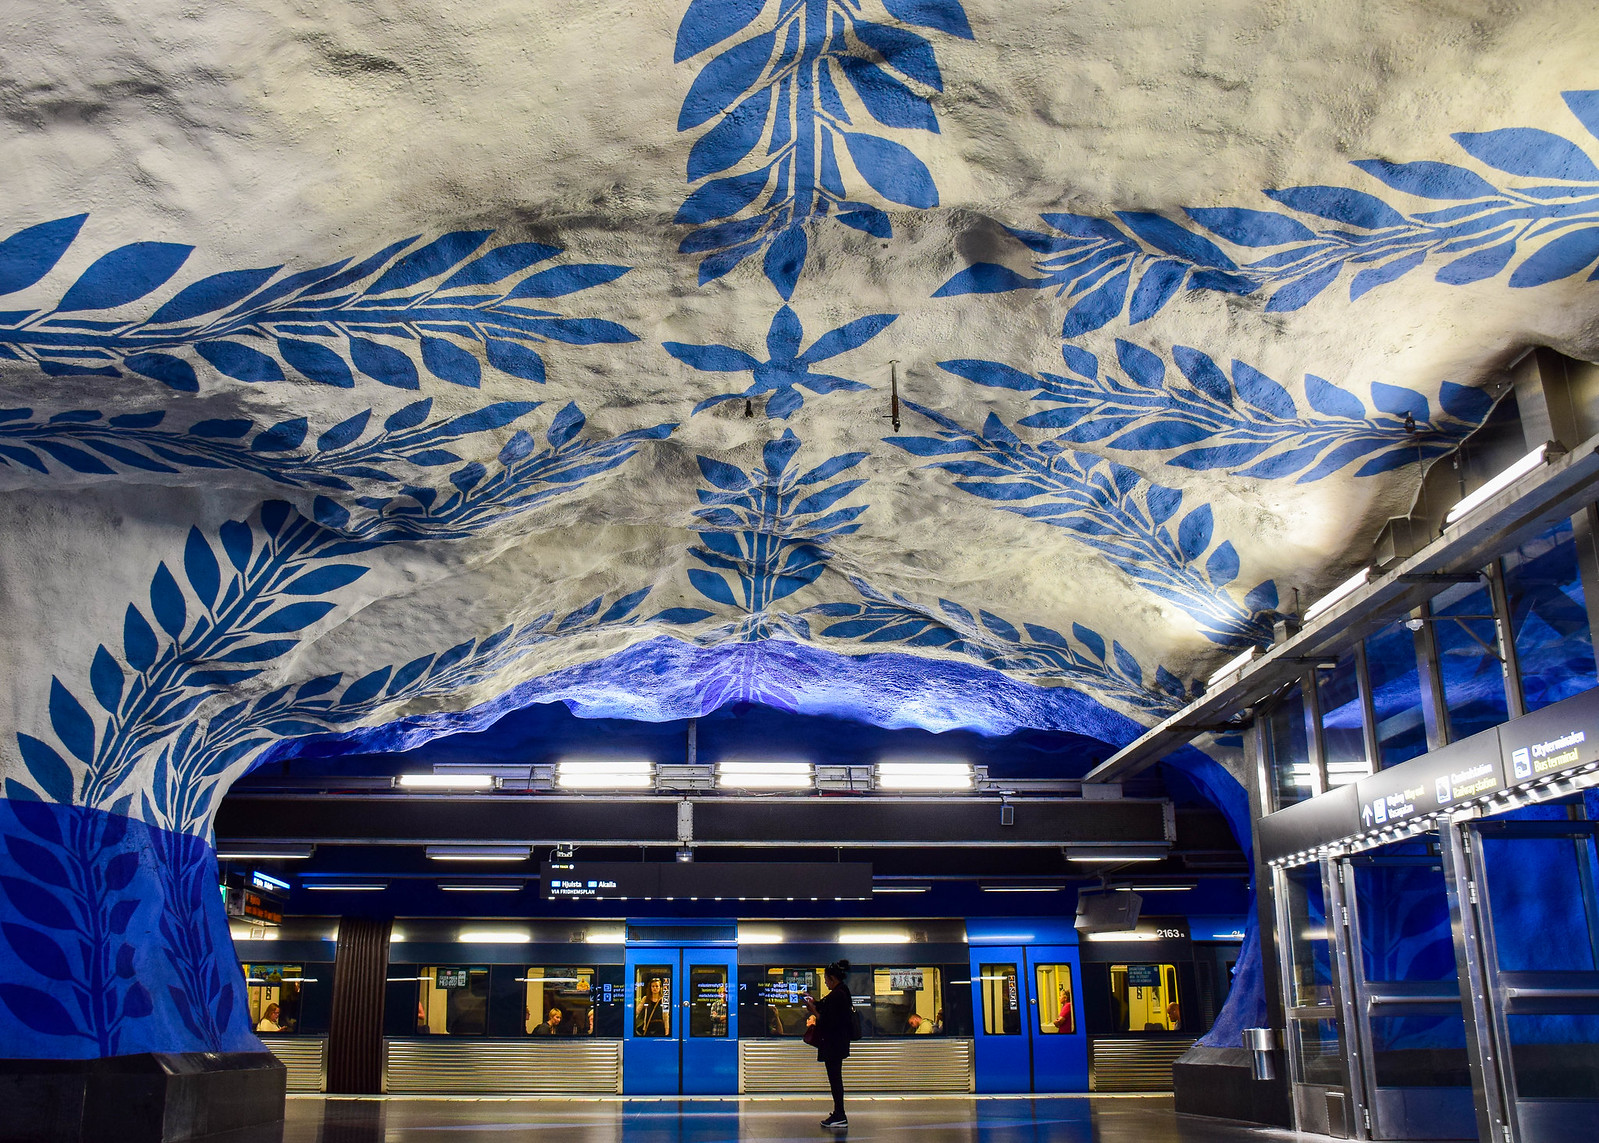 Tips to see Stockholm subway art